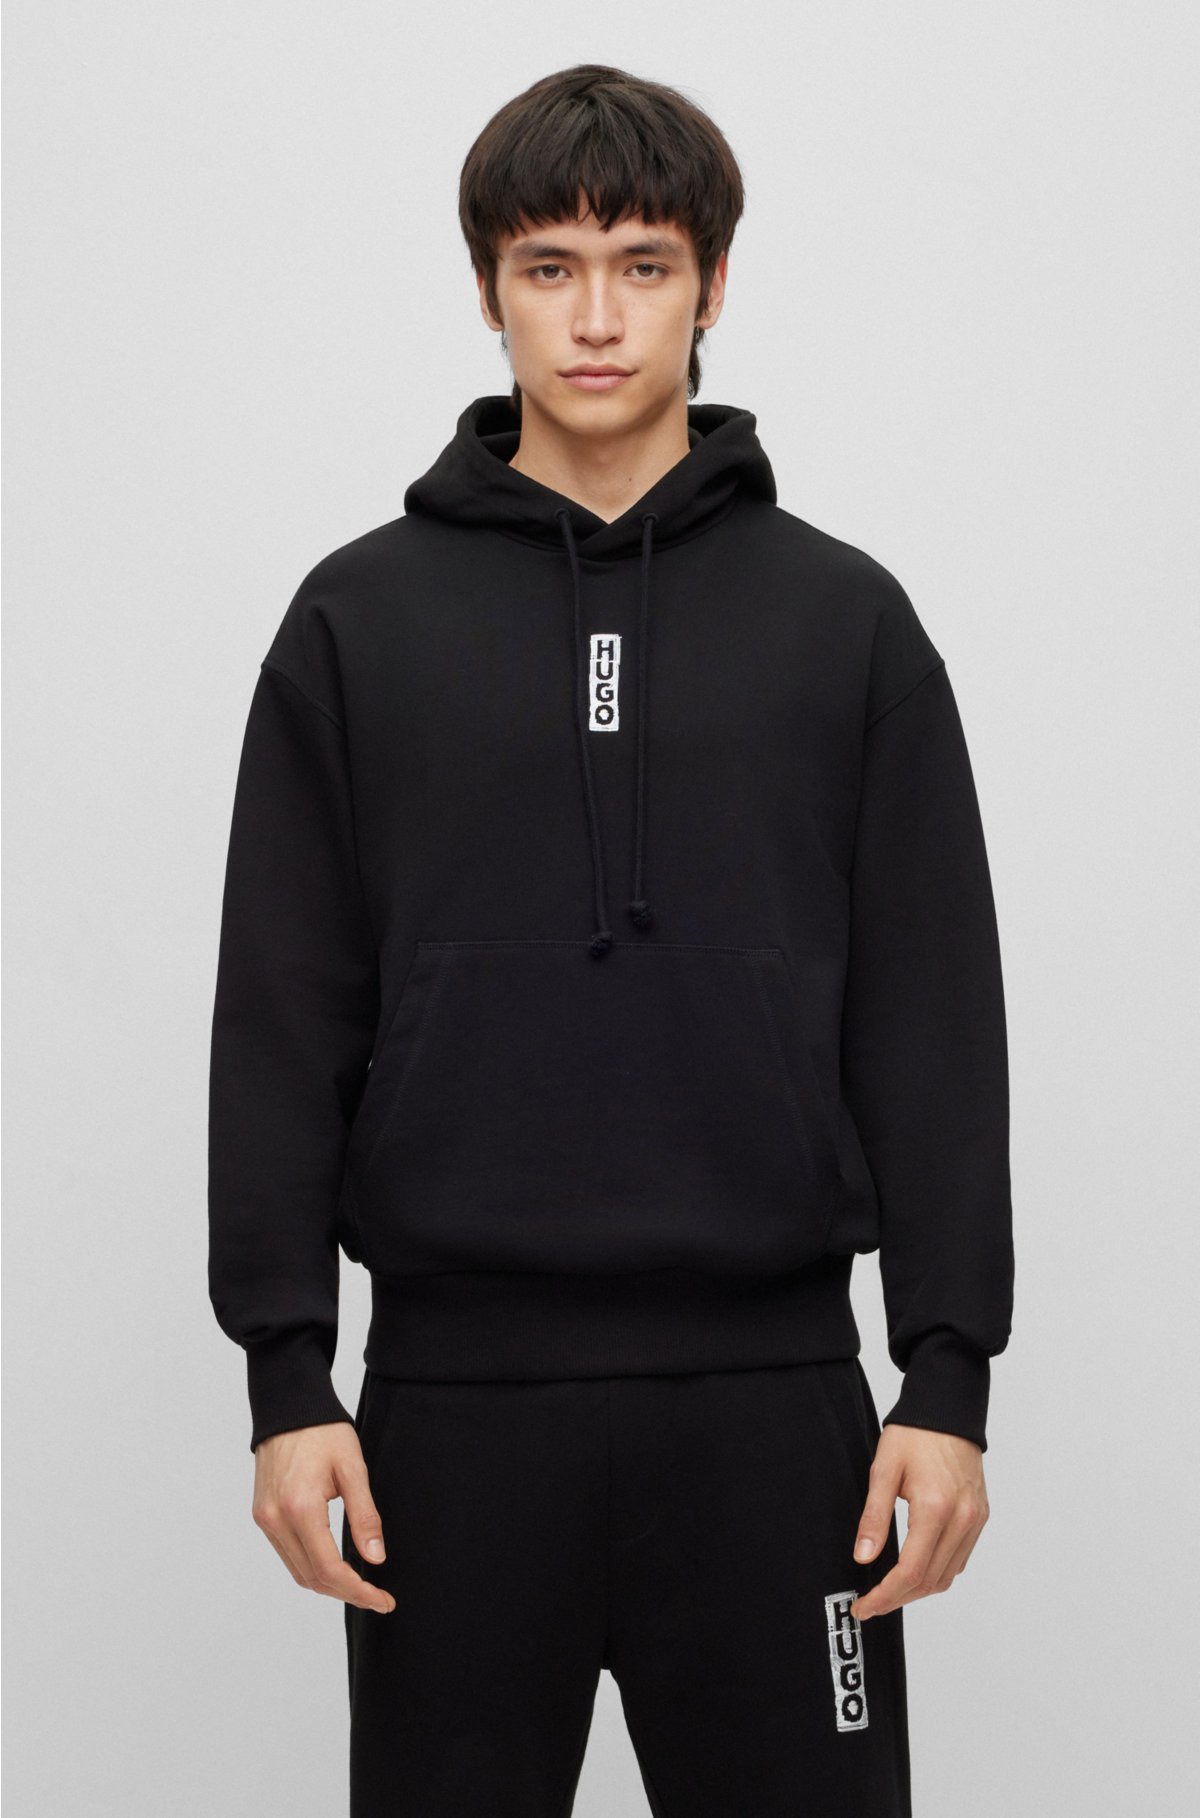 HUGO - Relaxed-fit cotton hoodie with marker-inspired logos